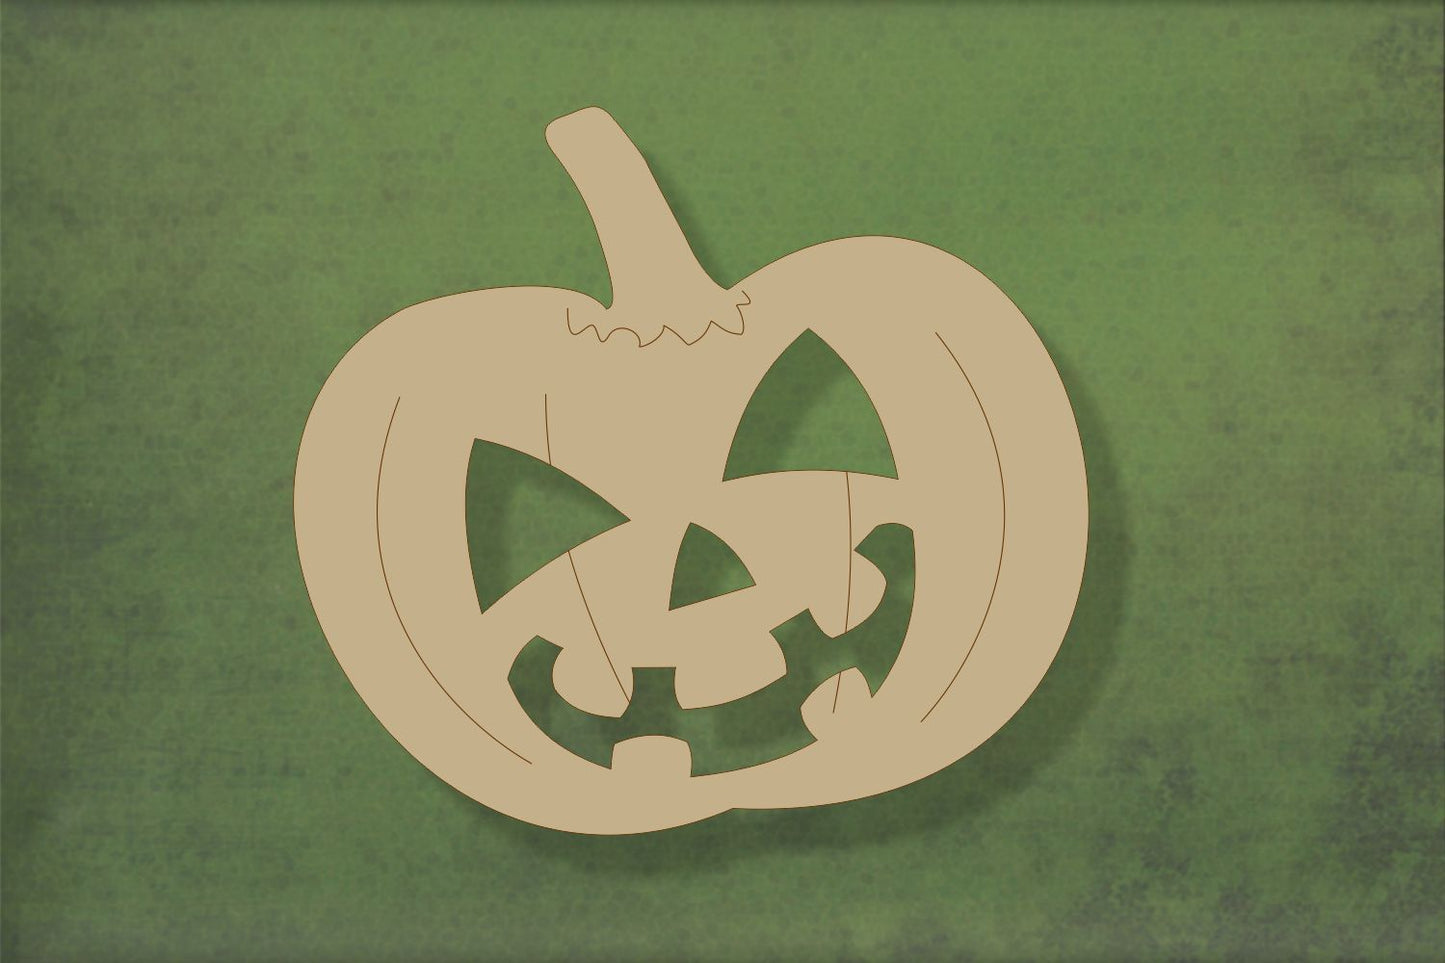 Laser cut, blank wooden Pumpkin 1 with cut out halloween face and etched detail shape for craft